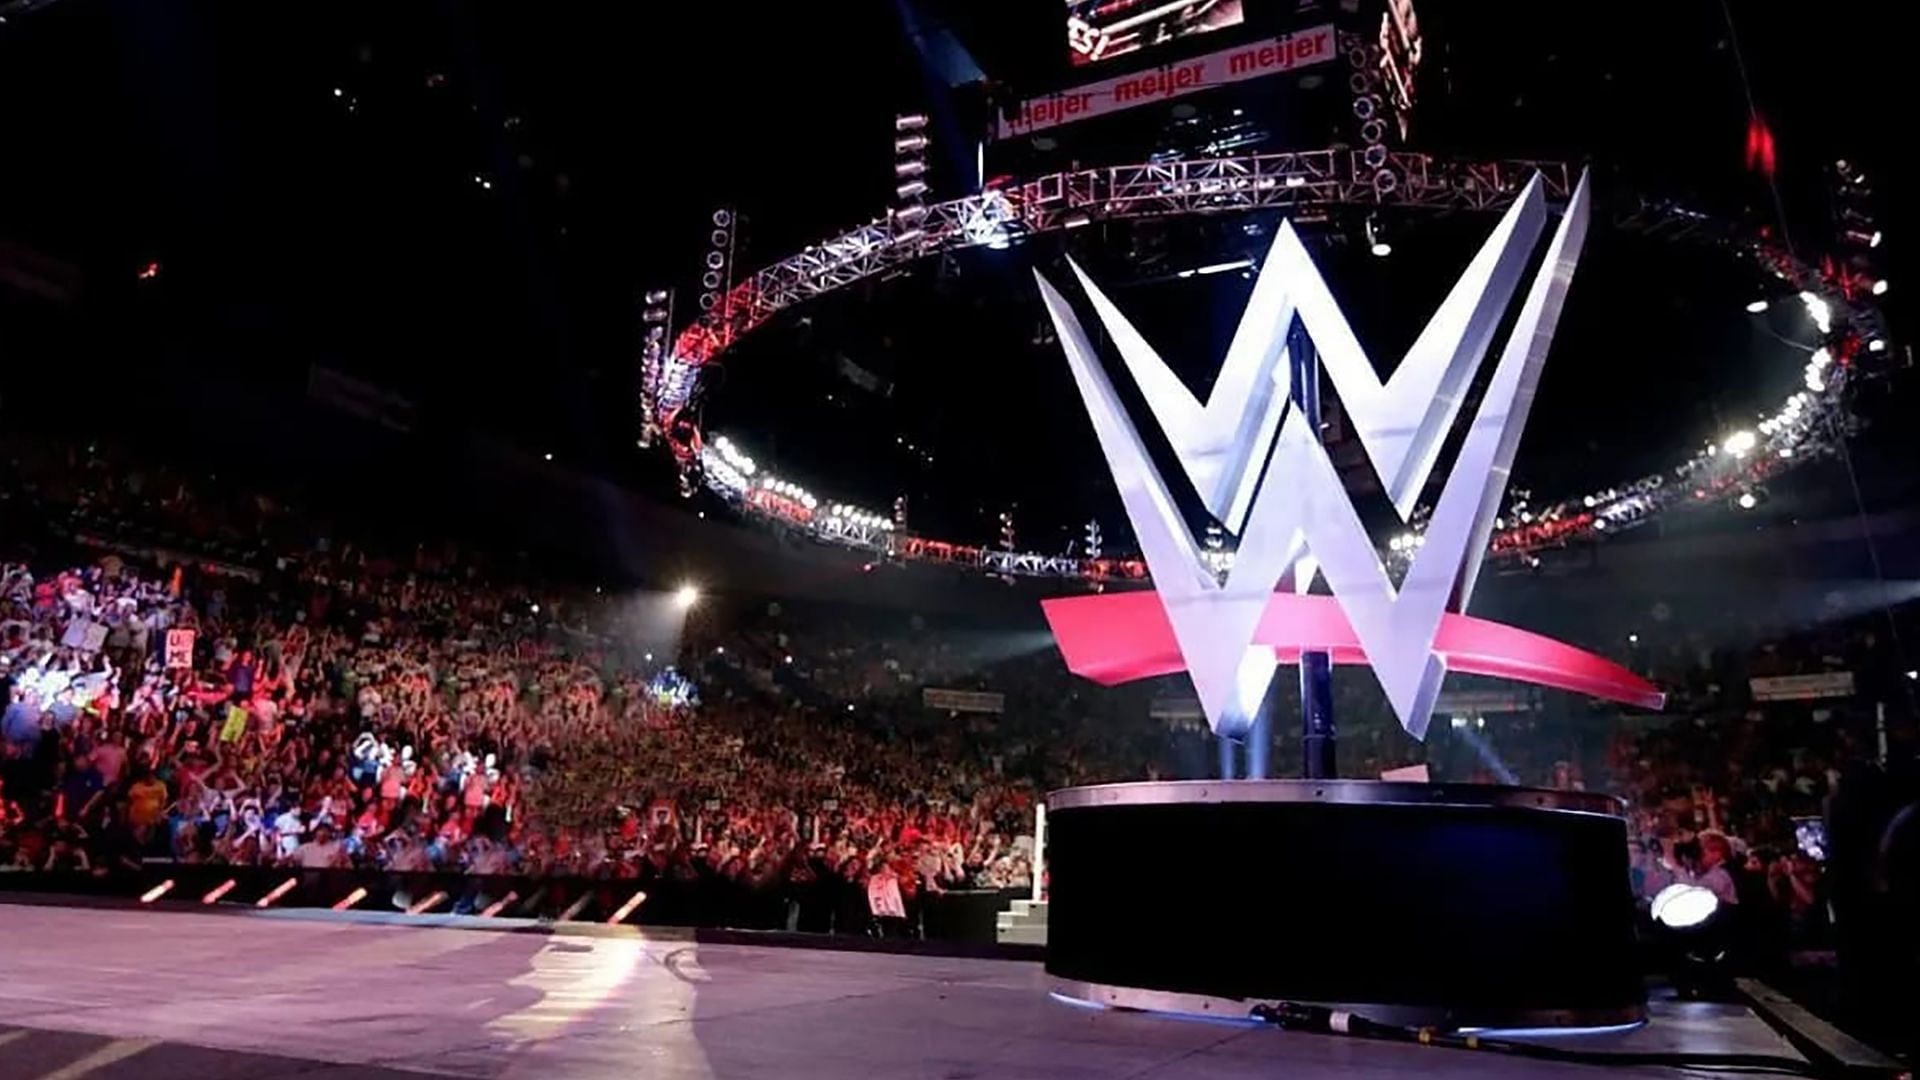 The WWE logo and stage on display at TV tapings